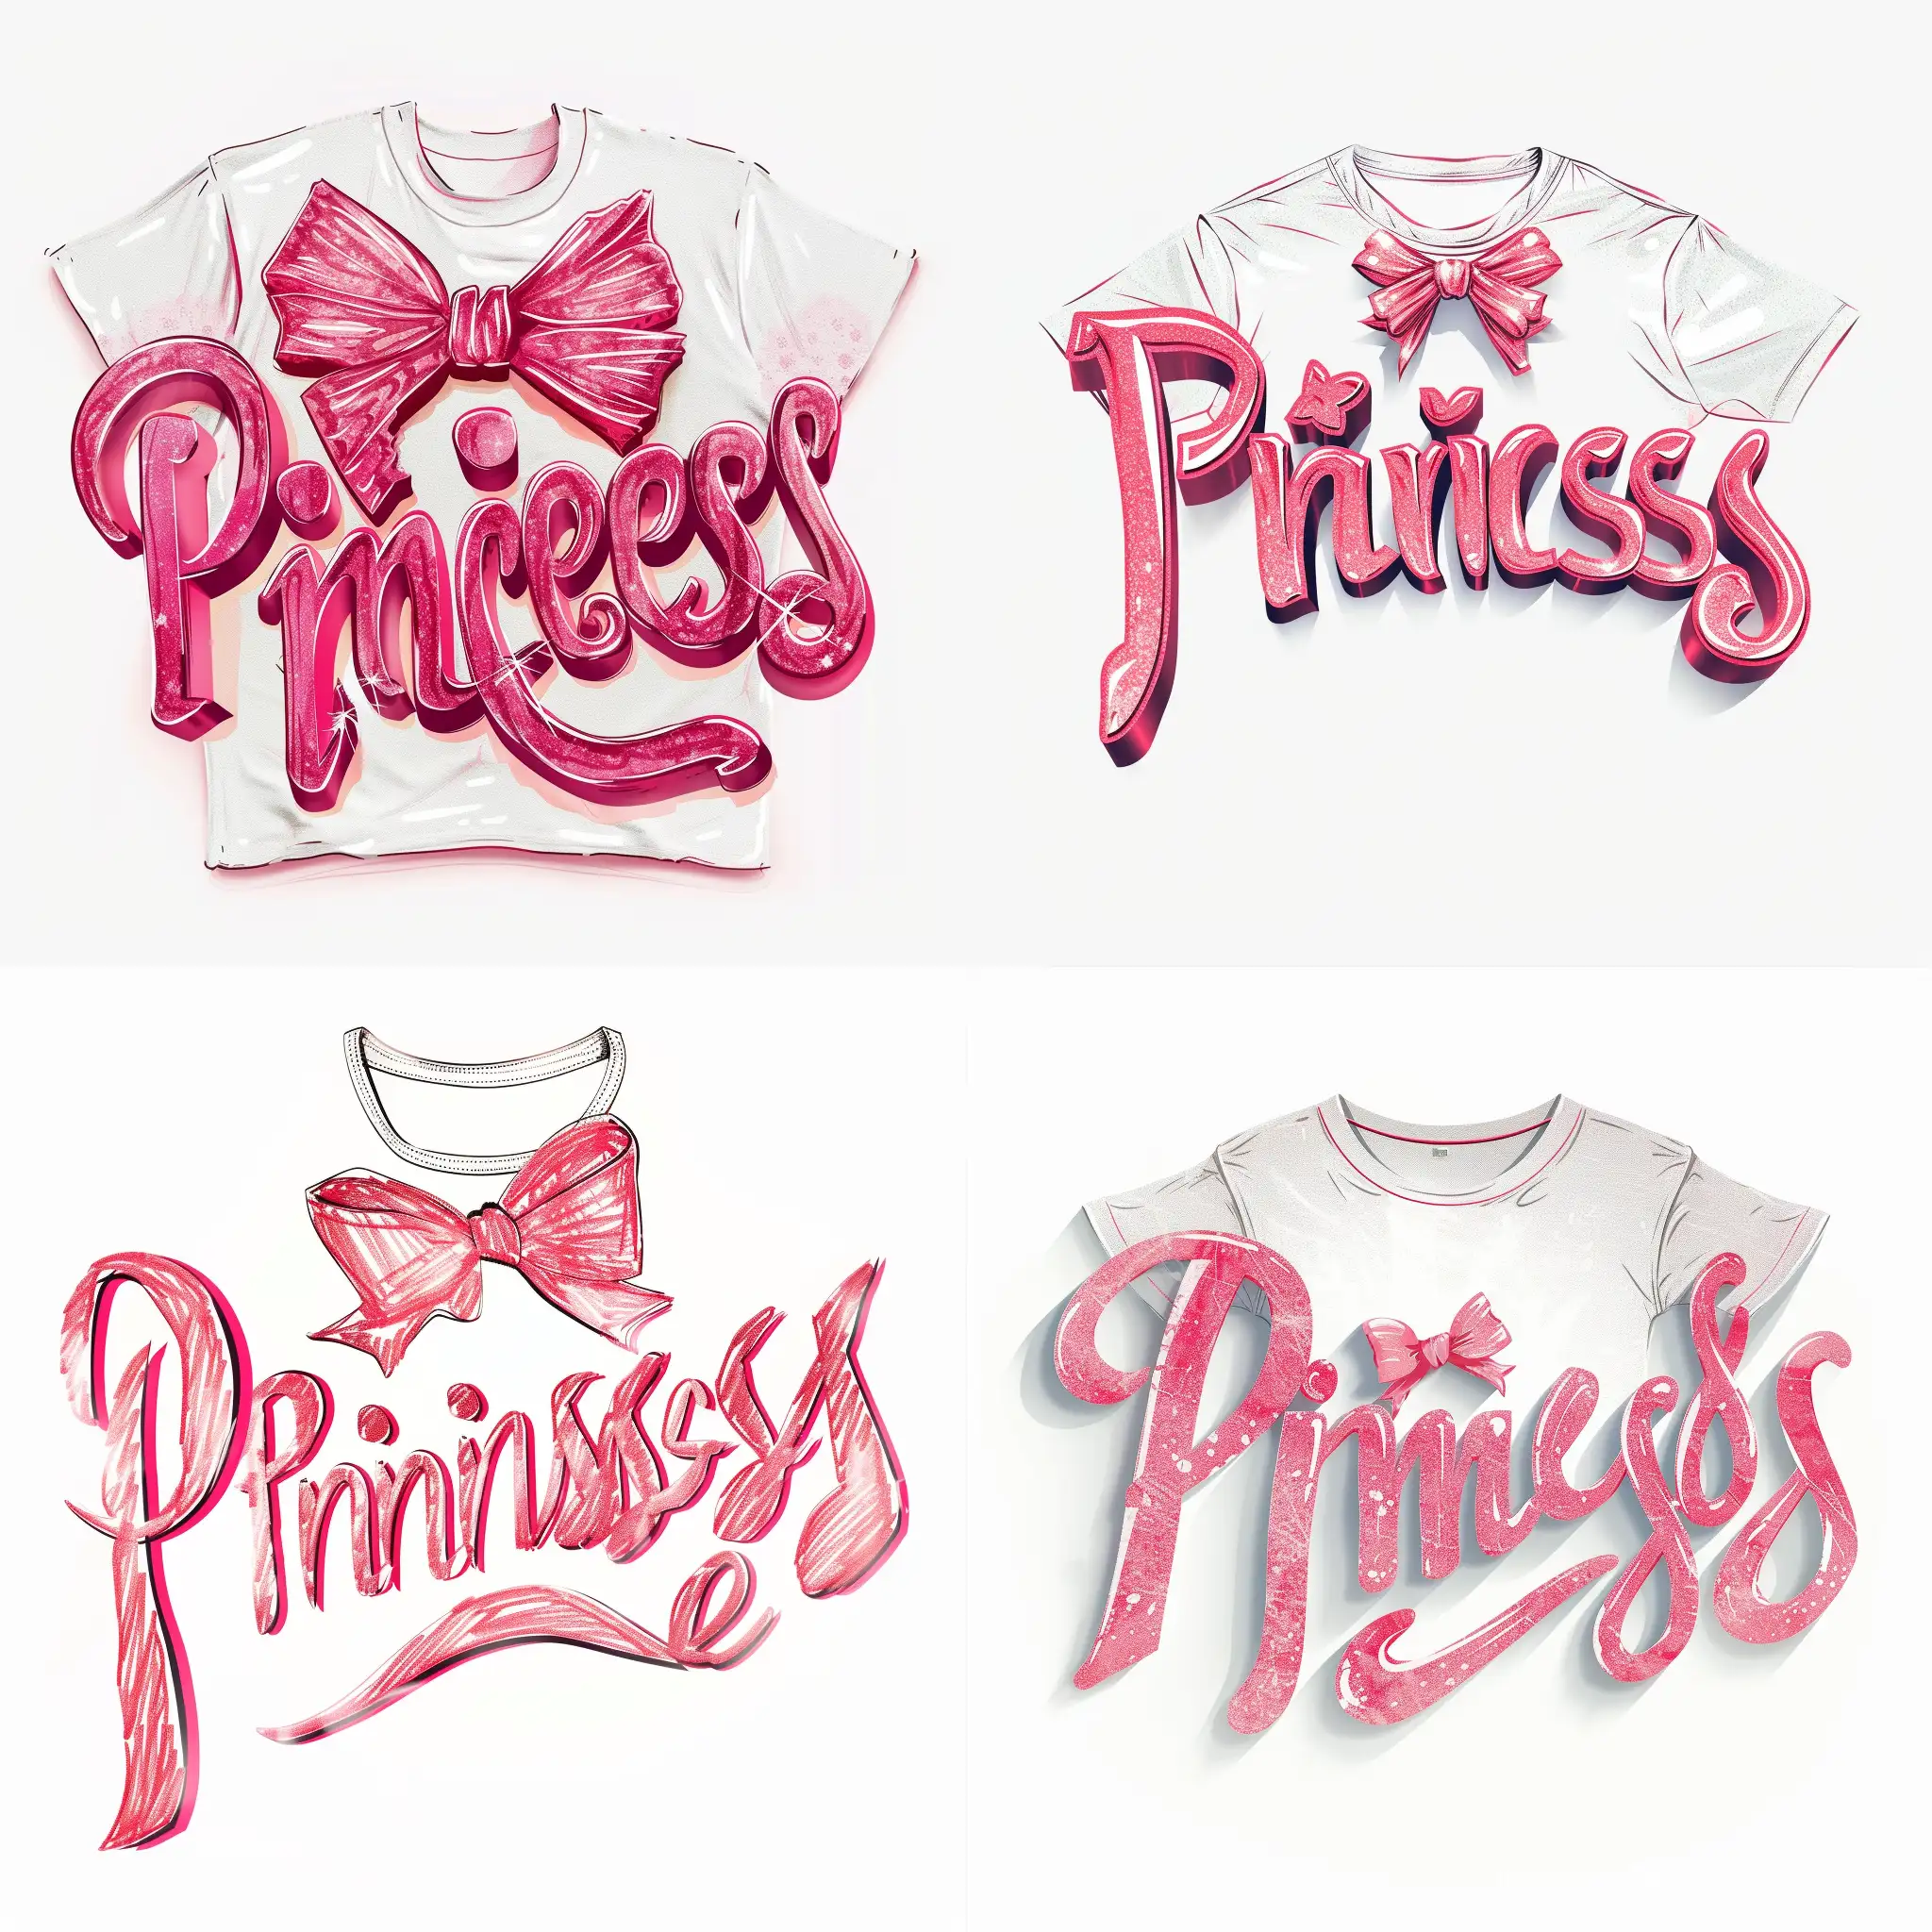 Cute-Princess-Typography-Tshirt-Design-with-Pink-Bow-Accent